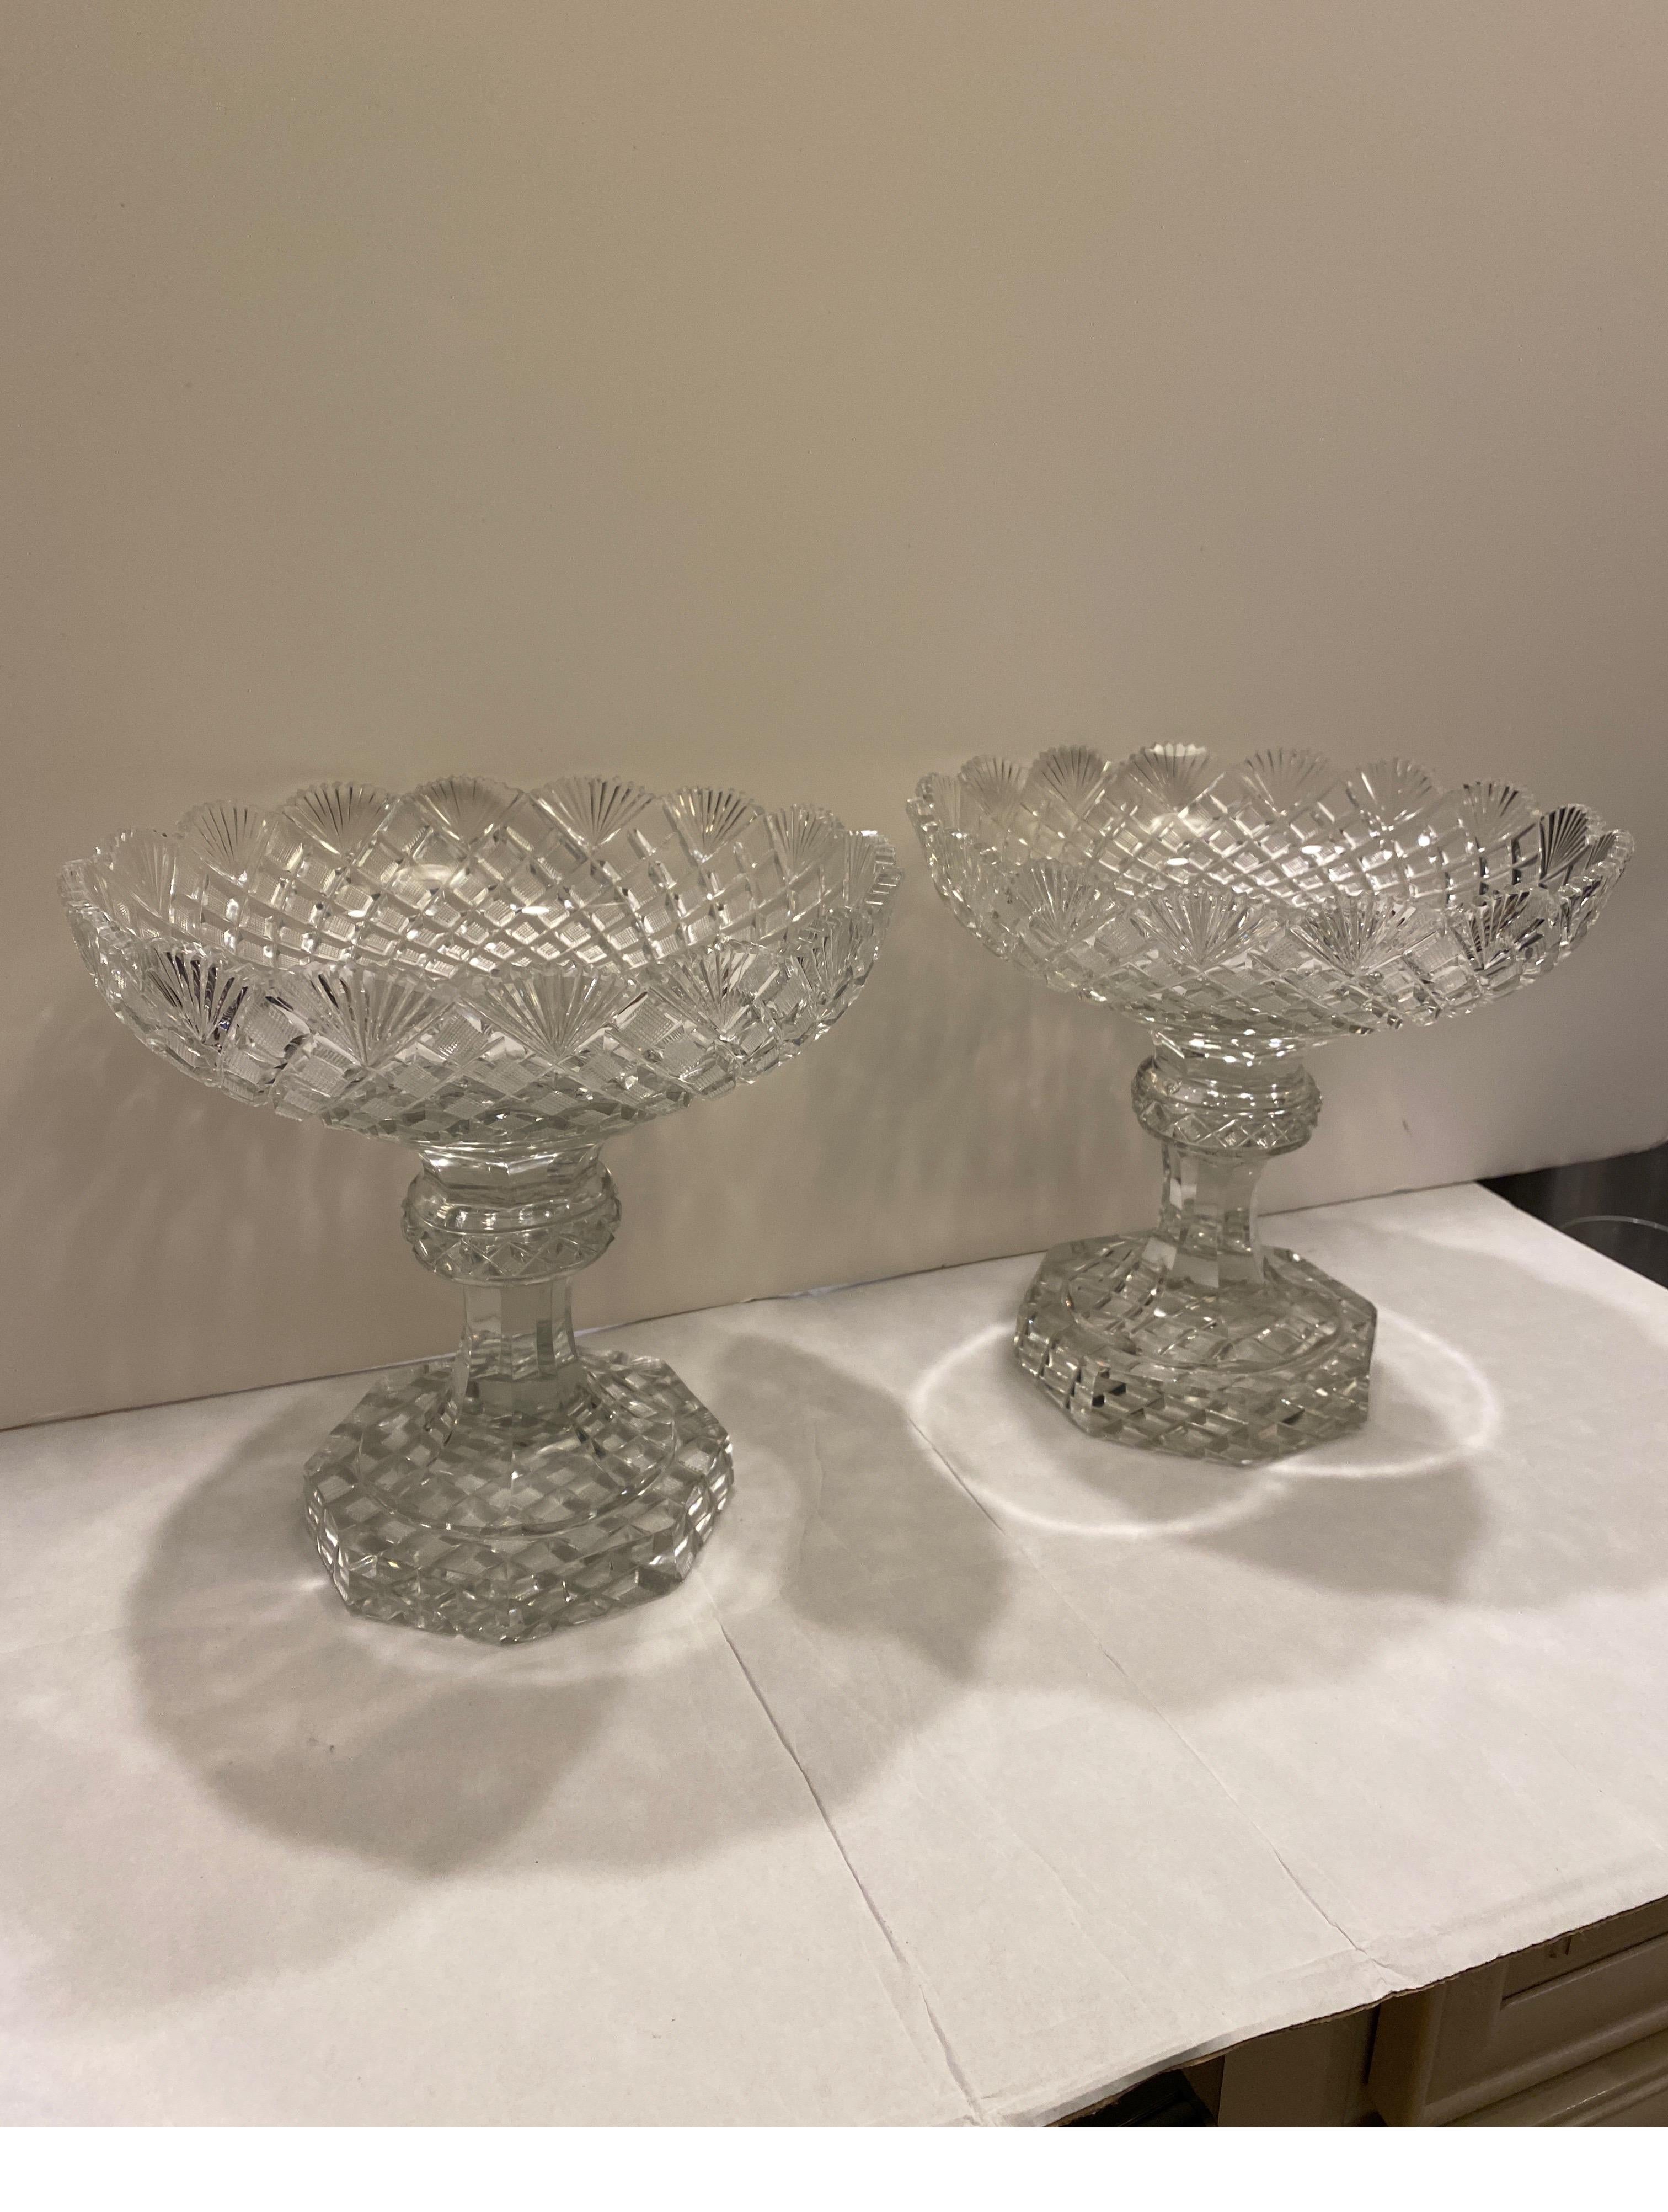 A stunning pair of Late 18th to early 19th Century hand cut glass footed compotes. The hand blown glass with all over cutting done by hand in England or Ireland, Circa 1800-20 9 inches in Diameter, 8.5 inches tall.